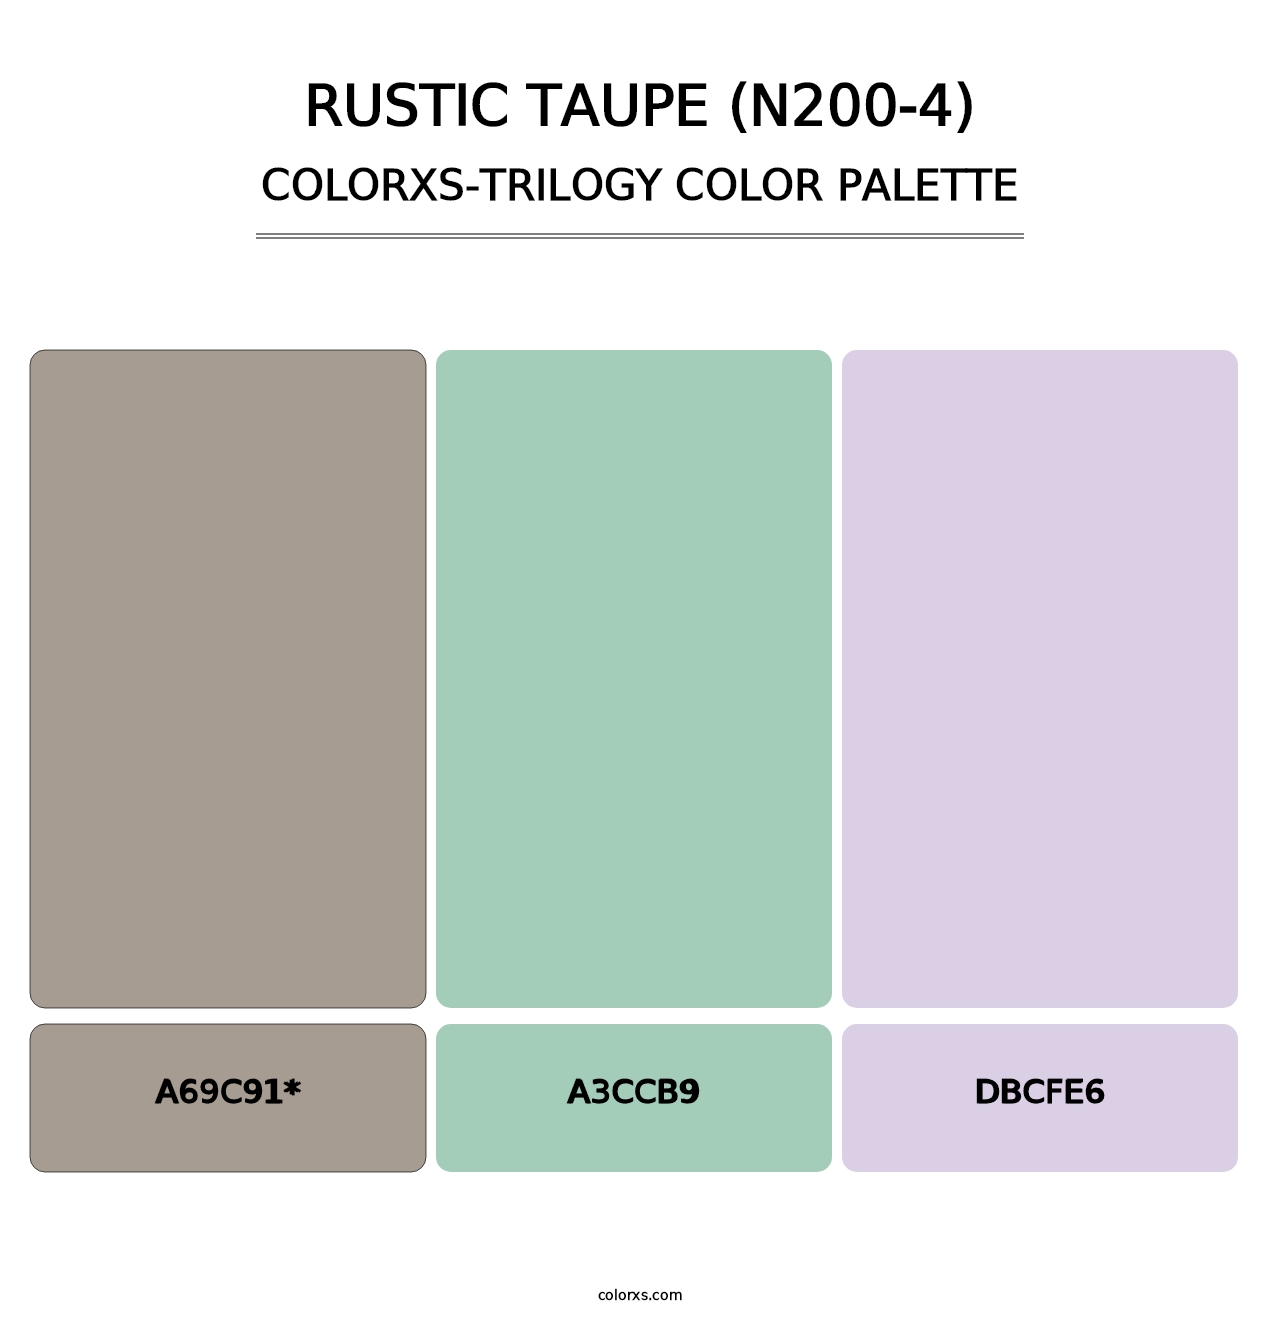 Rustic Taupe (N200-4) - Colorxs Trilogy Palette